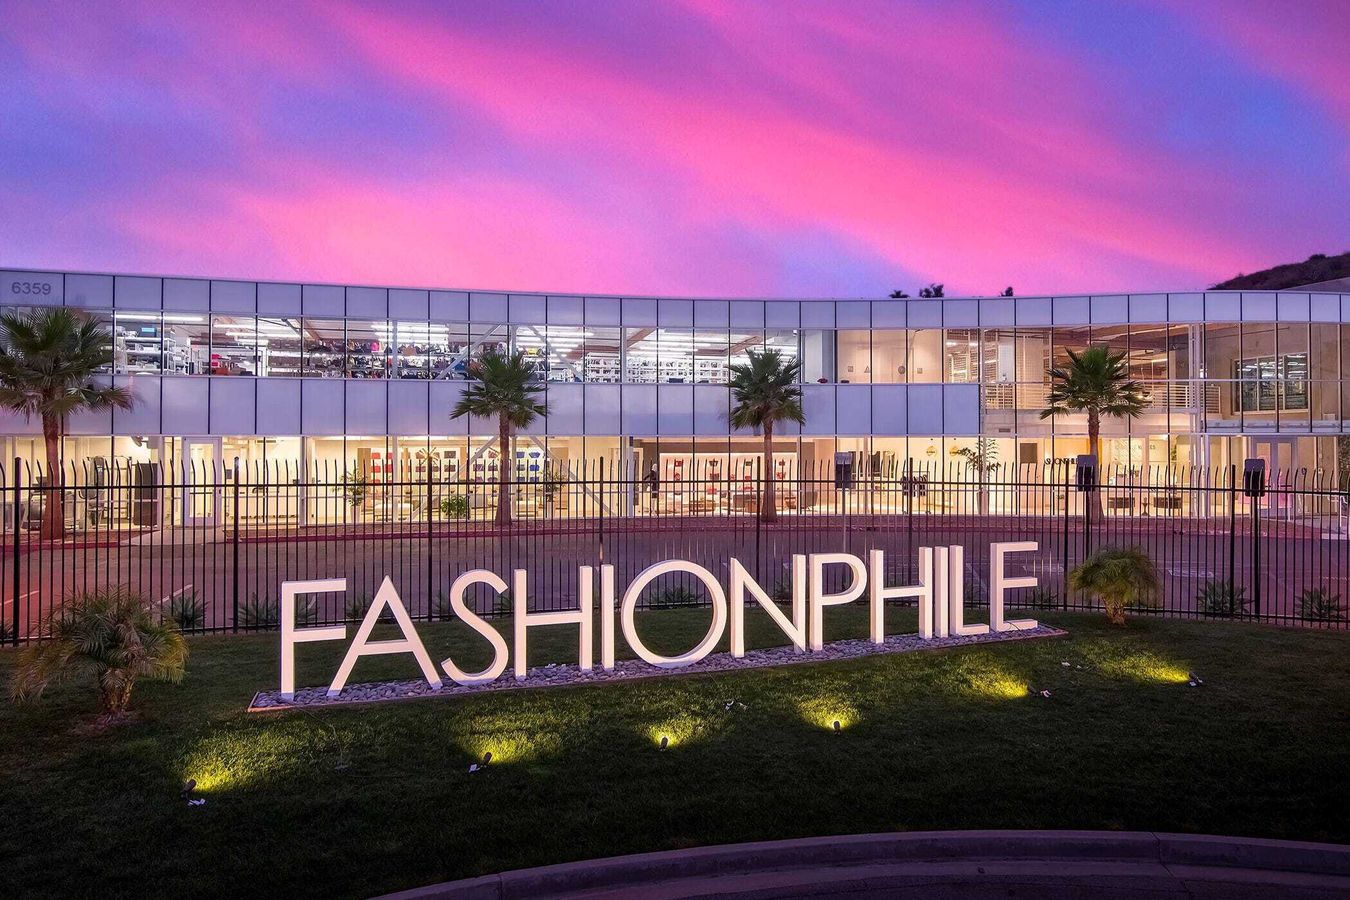 Fashionphile Bags Nearly $500 Million as Pre-Loved Luxury Spending Skyrockets